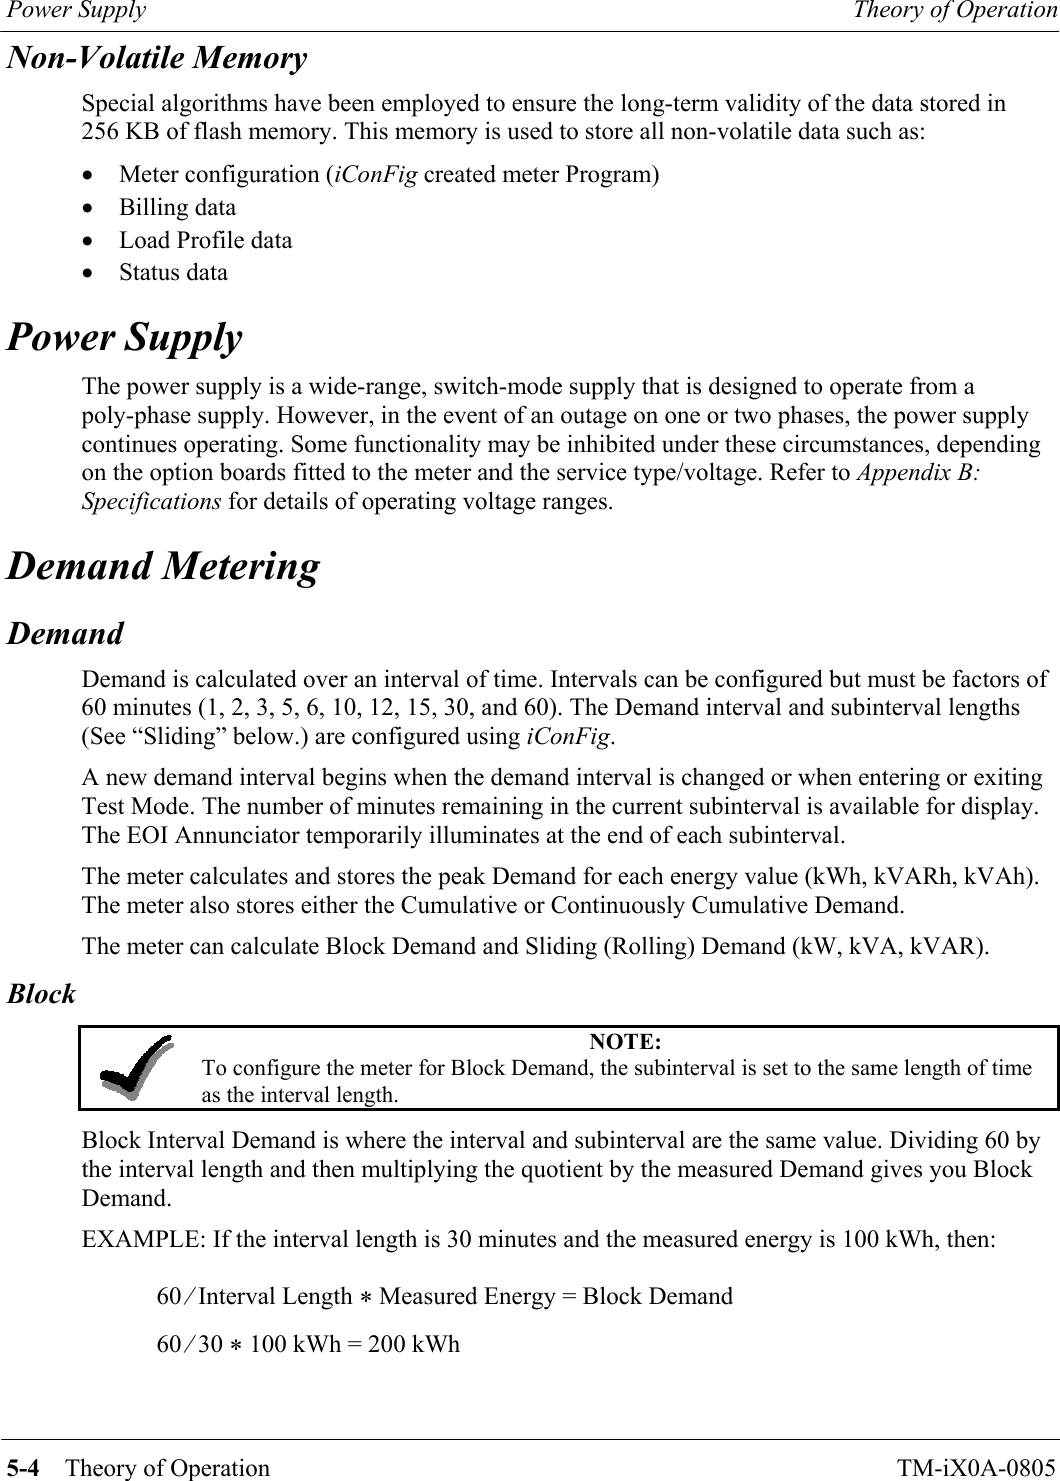 Power Supply  Theory of Operation   5-4    Theory of Operation TM-iX0A-0805 Non-Volatile Memory Special algorithms have been employed to ensure the long-term validity of the data stored in 256 KB of flash memory. This memory is used to store all non-volatile data such as: •  Meter configuration (iConFig created meter Program) •  Billing data •  Load Profile data •  Status data Power Supply The power supply is a wide-range, switch-mode supply that is designed to operate from a poly-phase supply. However, in the event of an outage on one or two phases, the power supply continues operating. Some functionality may be inhibited under these circumstances, depending on the option boards fitted to the meter and the service type/voltage. Refer to Appendix B:  Specifications for details of operating voltage ranges. Demand Metering Demand Demand is calculated over an interval of time. Intervals can be configured but must be factors of 60 minutes (1, 2, 3, 5, 6, 10, 12, 15, 30, and 60). The Demand interval and subinterval lengths (See “Sliding” below.) are configured using iConFig. A new demand interval begins when the demand interval is changed or when entering or exiting Test Mode. The number of minutes remaining in the current subinterval is available for display. The EOI Annunciator temporarily illuminates at the end of each subinterval. The meter calculates and stores the peak Demand for each energy value (kWh, kVARh, kVAh). The meter also stores either the Cumulative or Continuously Cumulative Demand. The meter can calculate Block Demand and Sliding (Rolling) Demand (kW, kVA, kVAR). Block  NOTE: To configure the meter for Block Demand, the subinterval is set to the same length of time as the interval length.  Block Interval Demand is where the interval and subinterval are the same value. Dividing 60 by the interval length and then multiplying the quotient by the measured Demand gives you Block Demand. EXAMPLE: If the interval length is 30 minutes and the measured energy is 100 kWh, then: 60 ⁄ Interval Length * Measured Energy = Block Demand 60 ⁄ 30 * 100 kWh = 200 kWh      